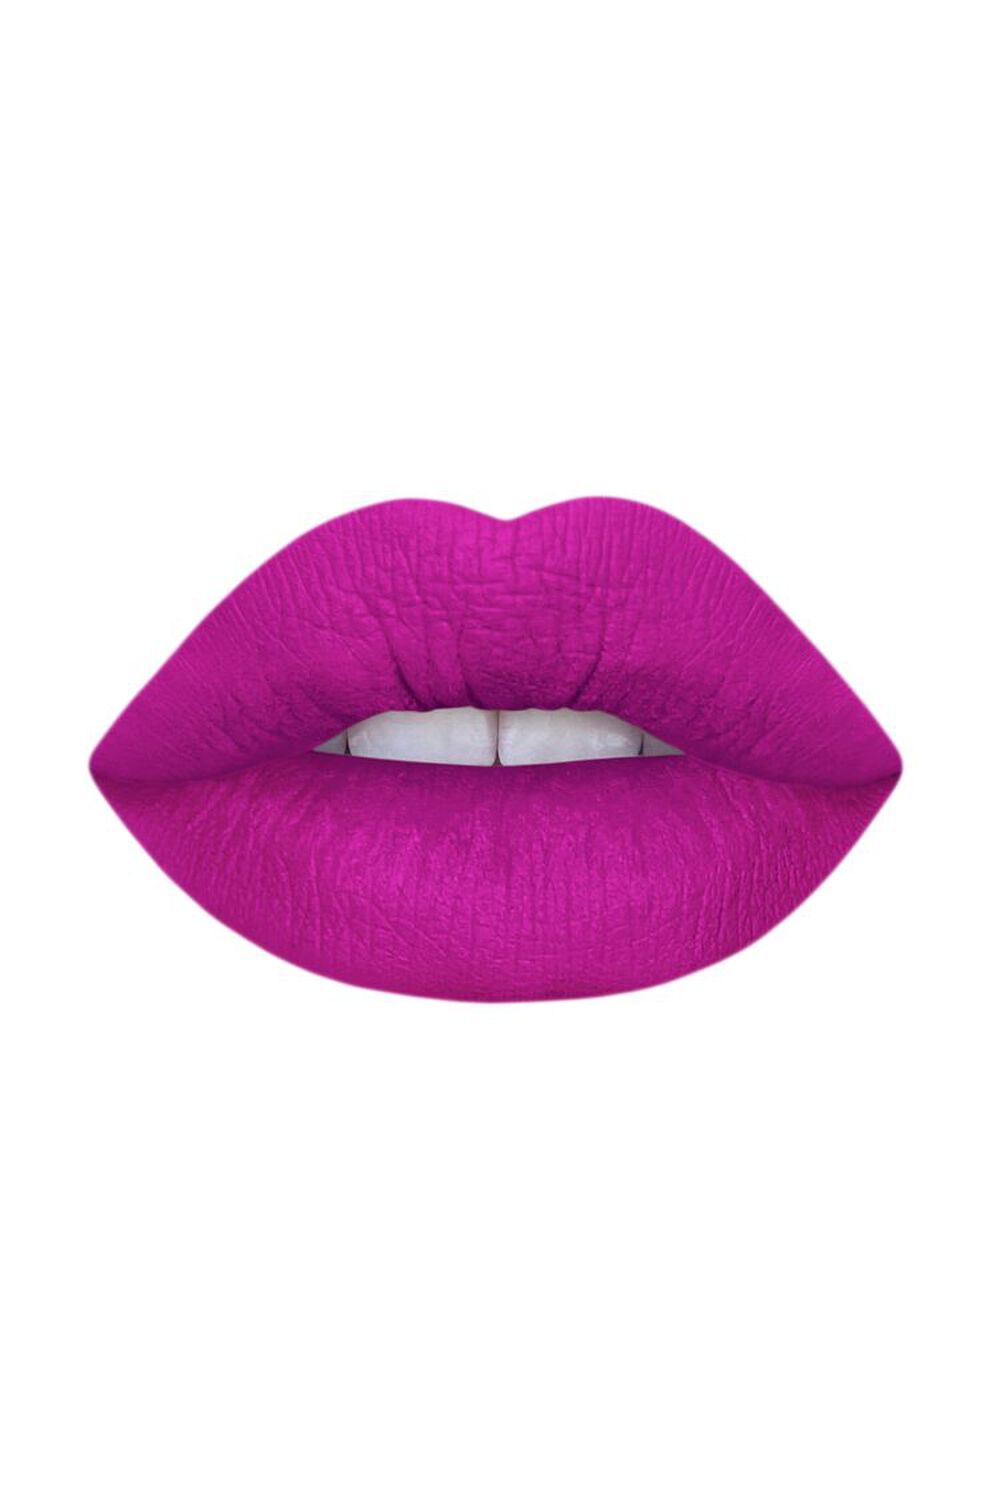 Lime Crime Soft Touch Lipstick			, image 2